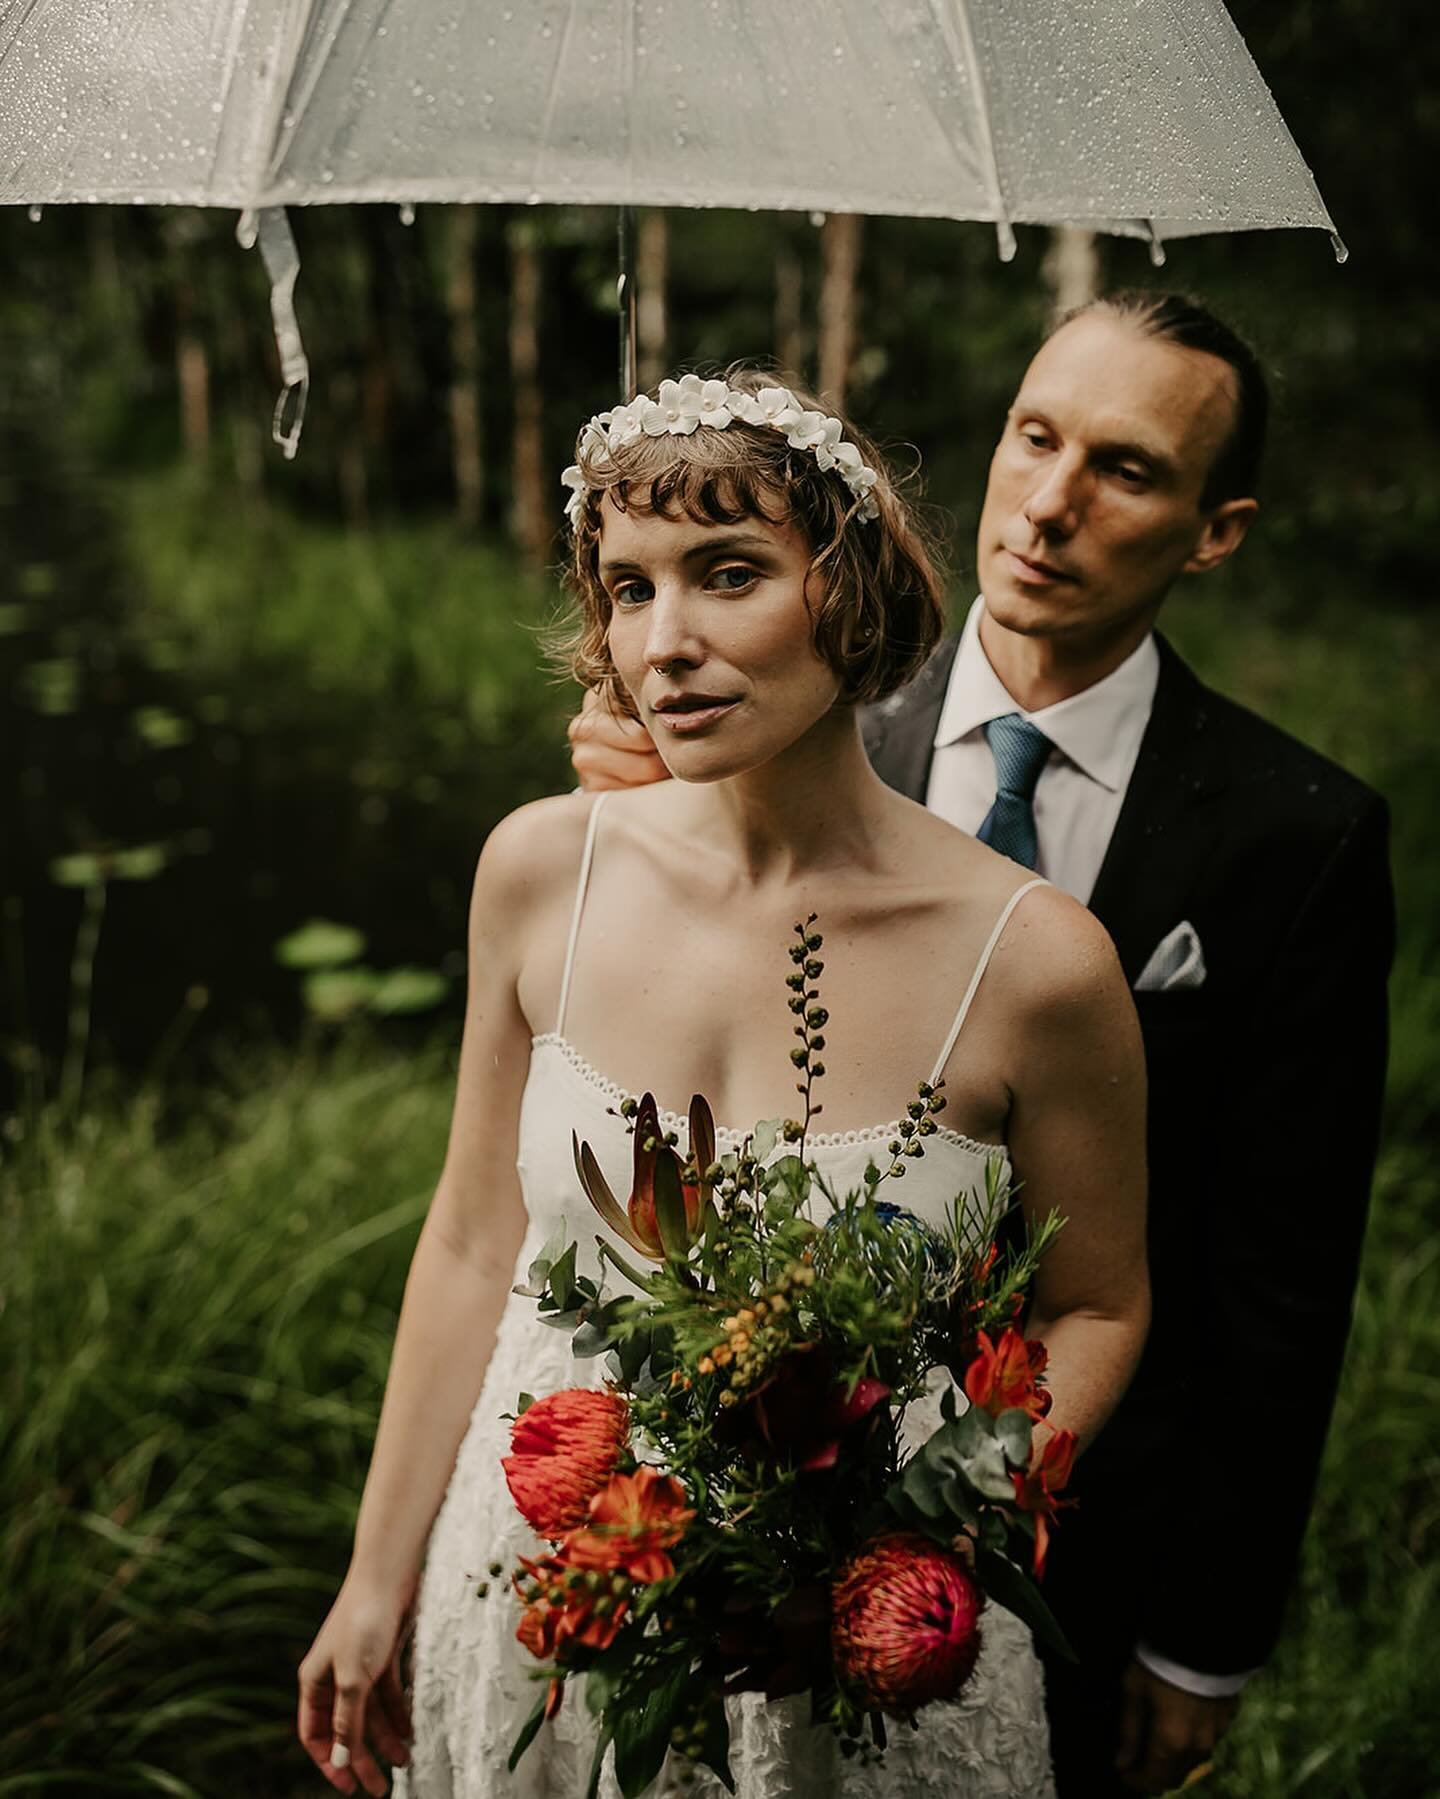 ~ Hannah &amp; Robert ~ 

Rain on your wedding day may not always be welcome but I simply love the energy it can bring. These two embraced it in their stunning forest setting for their elopement. Congrats guys. 

Celebrant @love.withrin 
Dress @alema